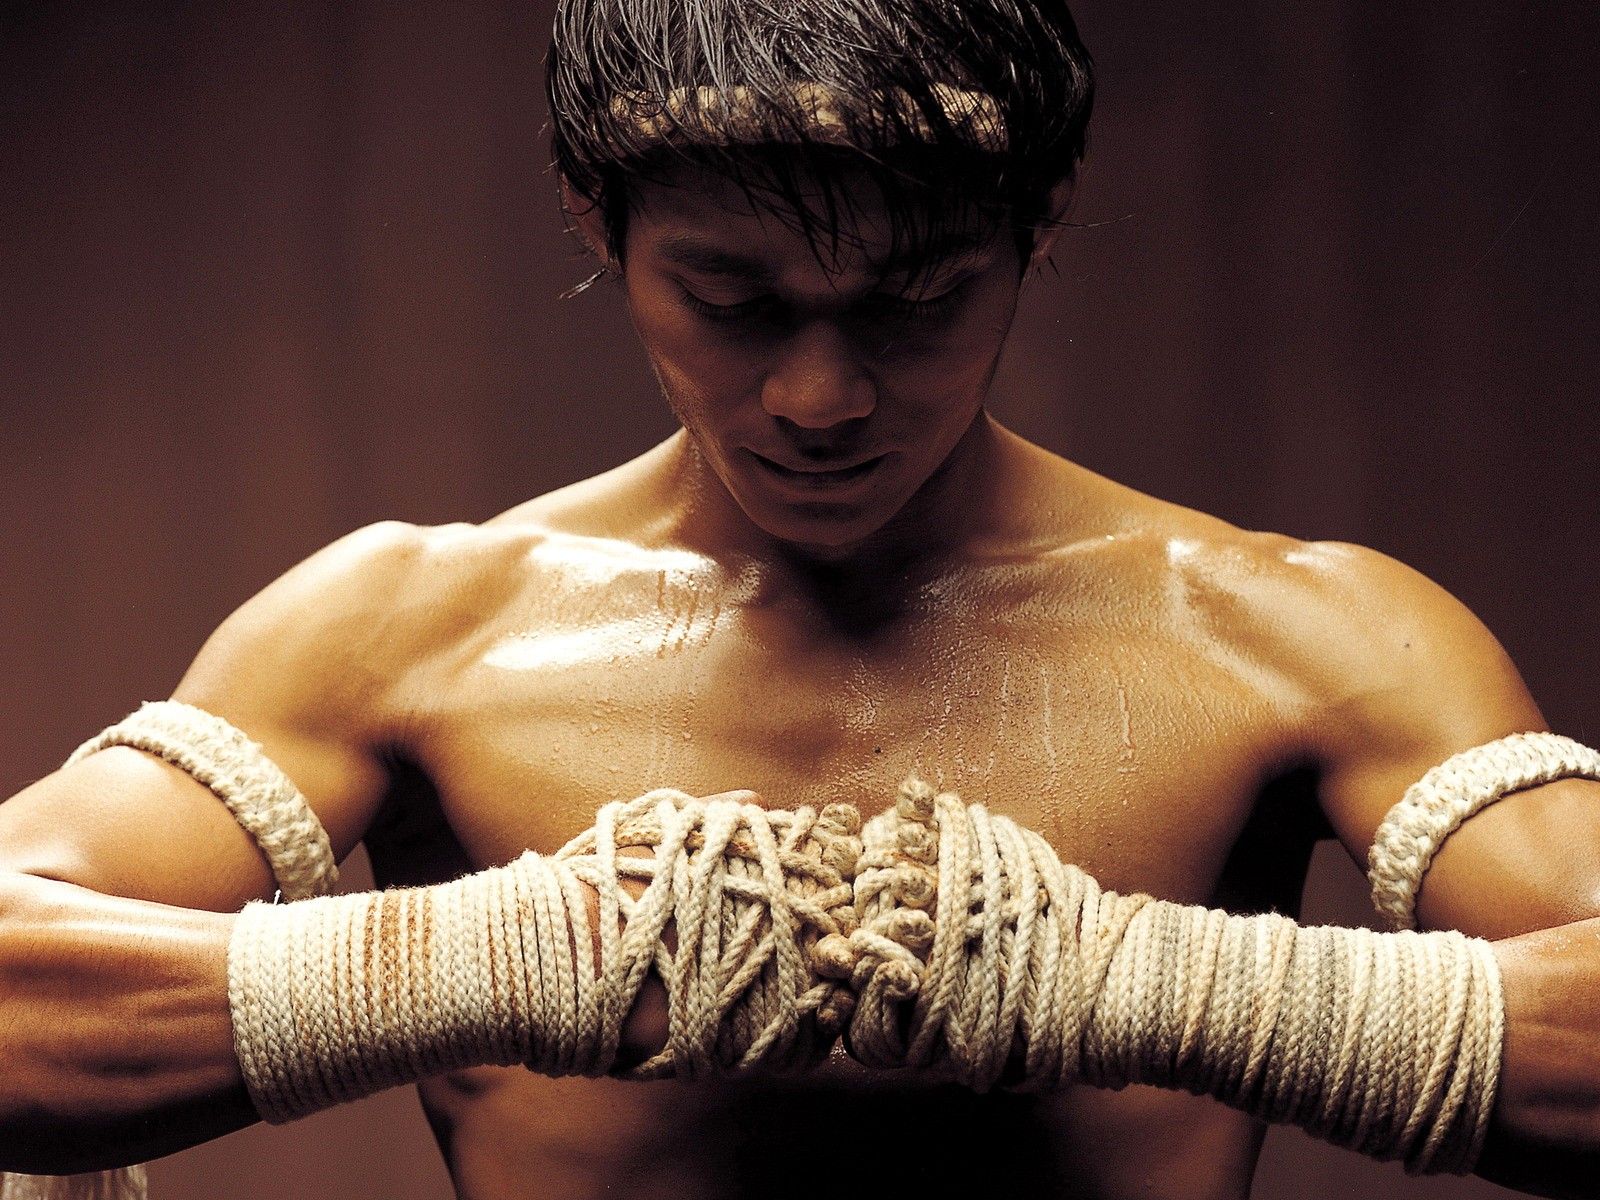 Collection of some Best Martial Arts Wallpapers - All HD Wallpapers